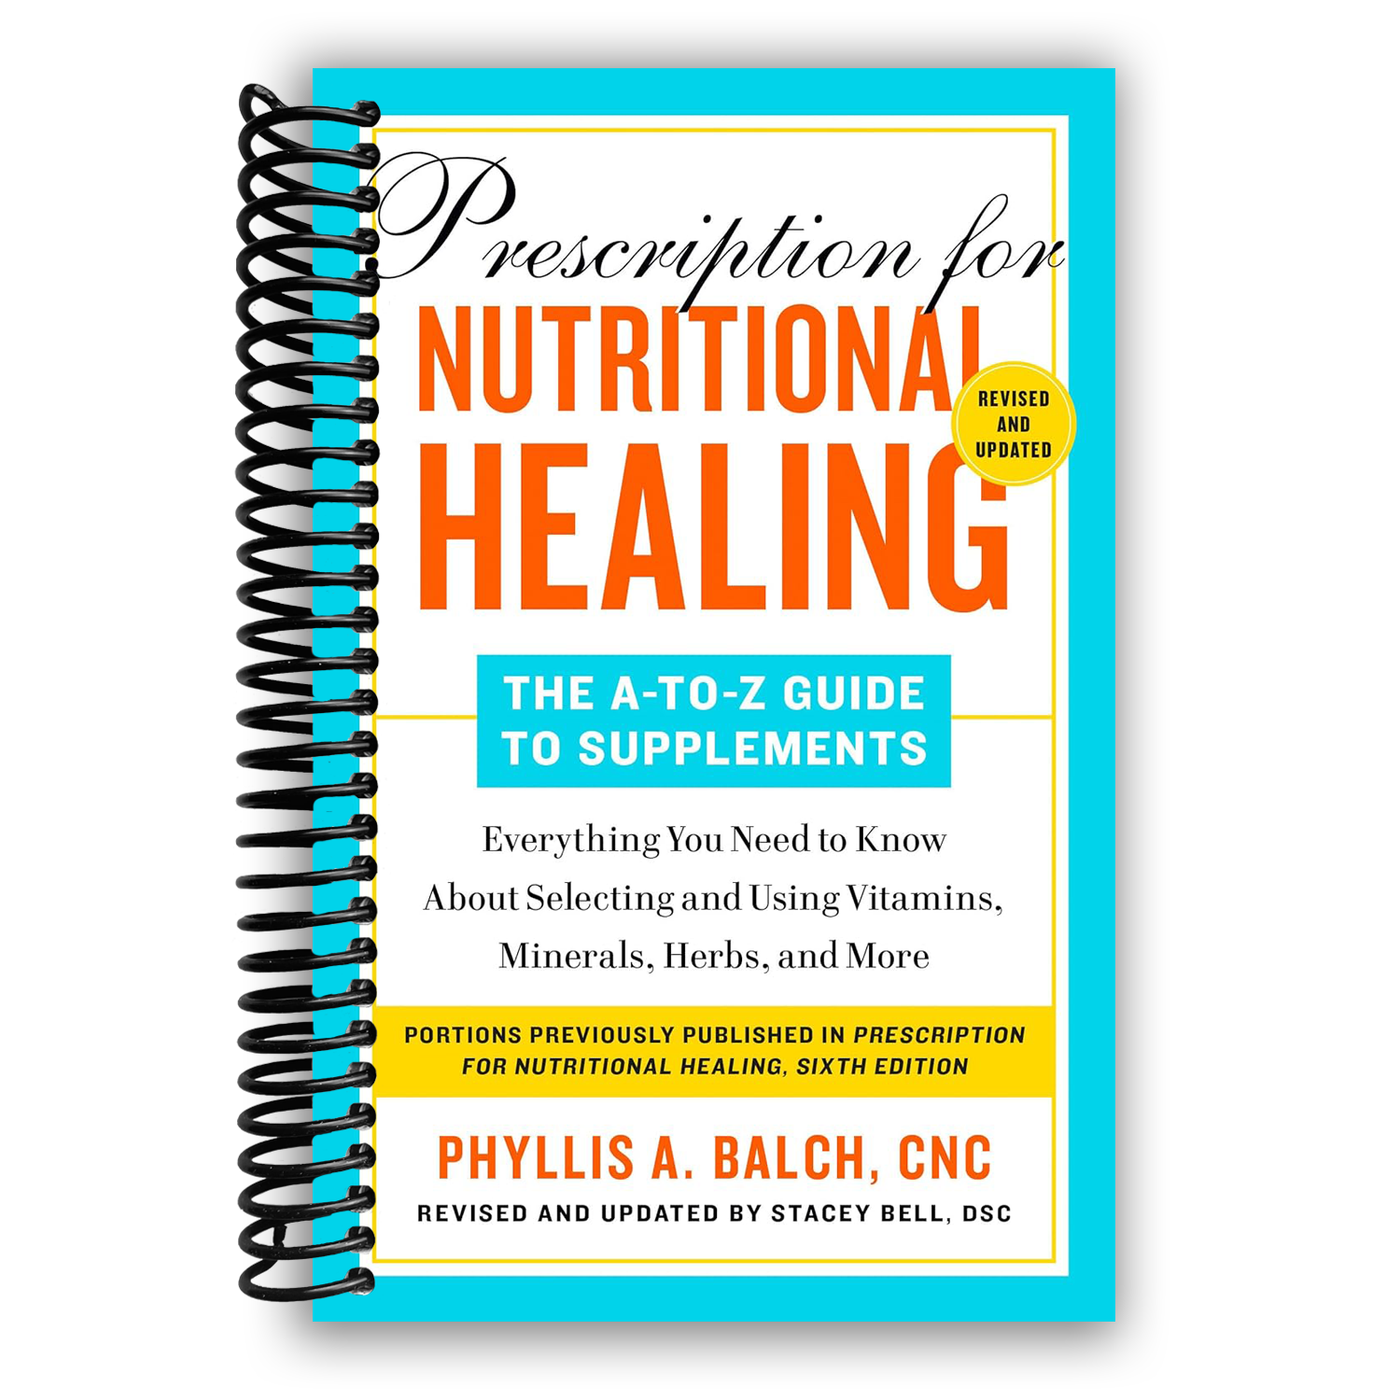 Prescription for Nutritional Healing: The A-to-Z Guide to Supplements, 6th Edition: Everything You Need to Know About Selecting and Using Vitamins, Minerals, Herbs, and More (Spiral Bound)